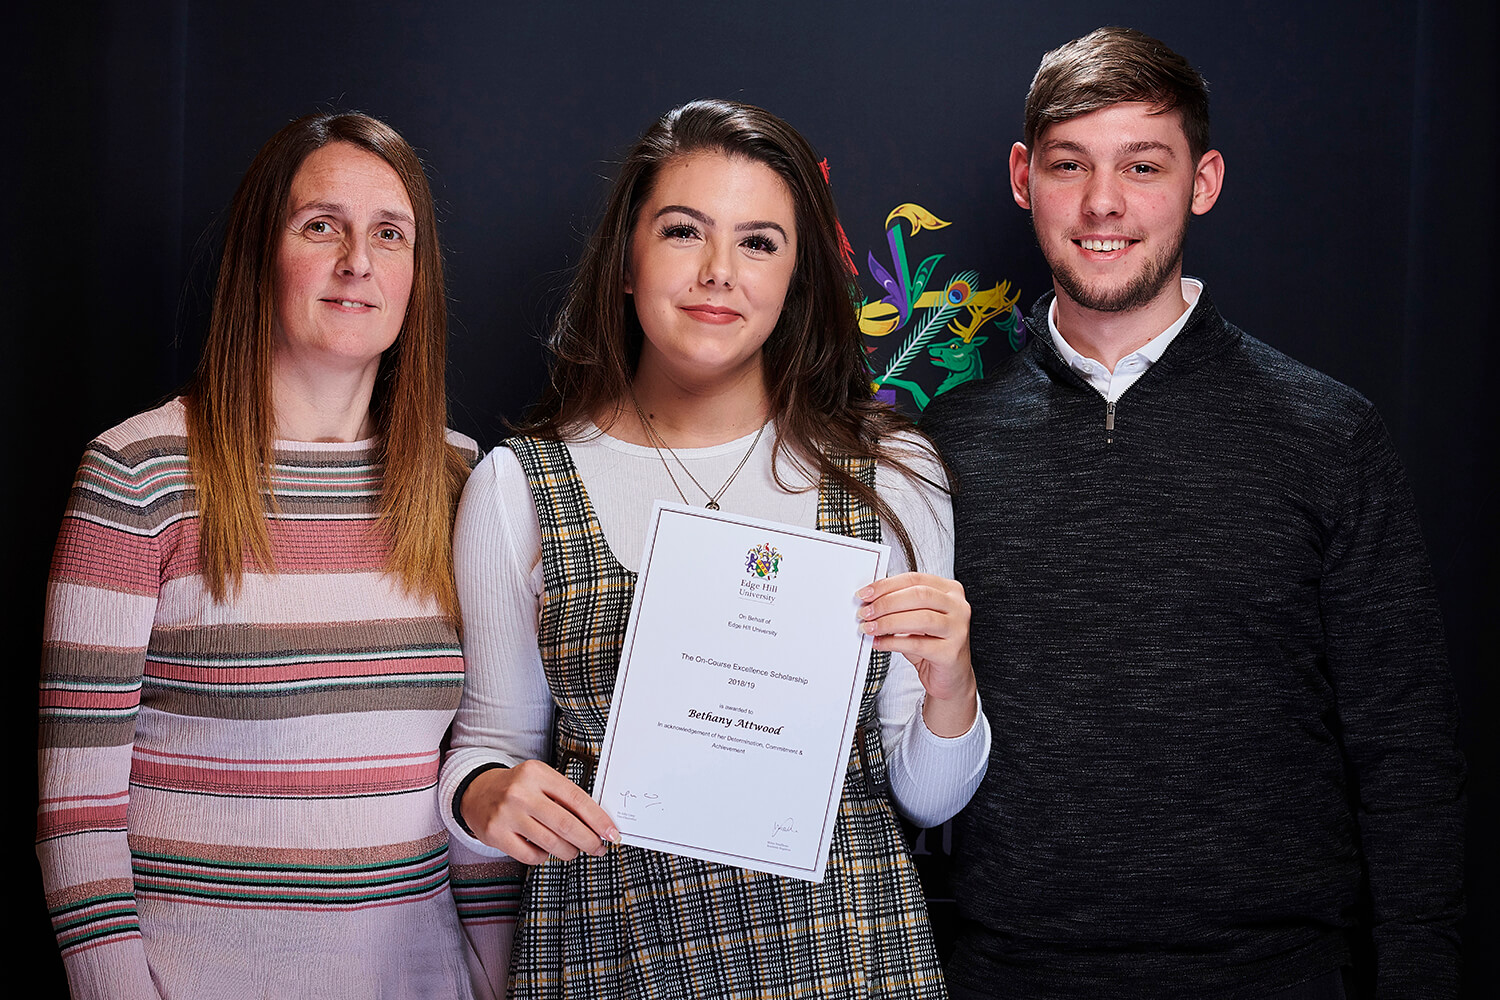 Excellence Scholarship winner Bethany Attwood, with her family, showing her certificate at a Scholarship Awards Evening.